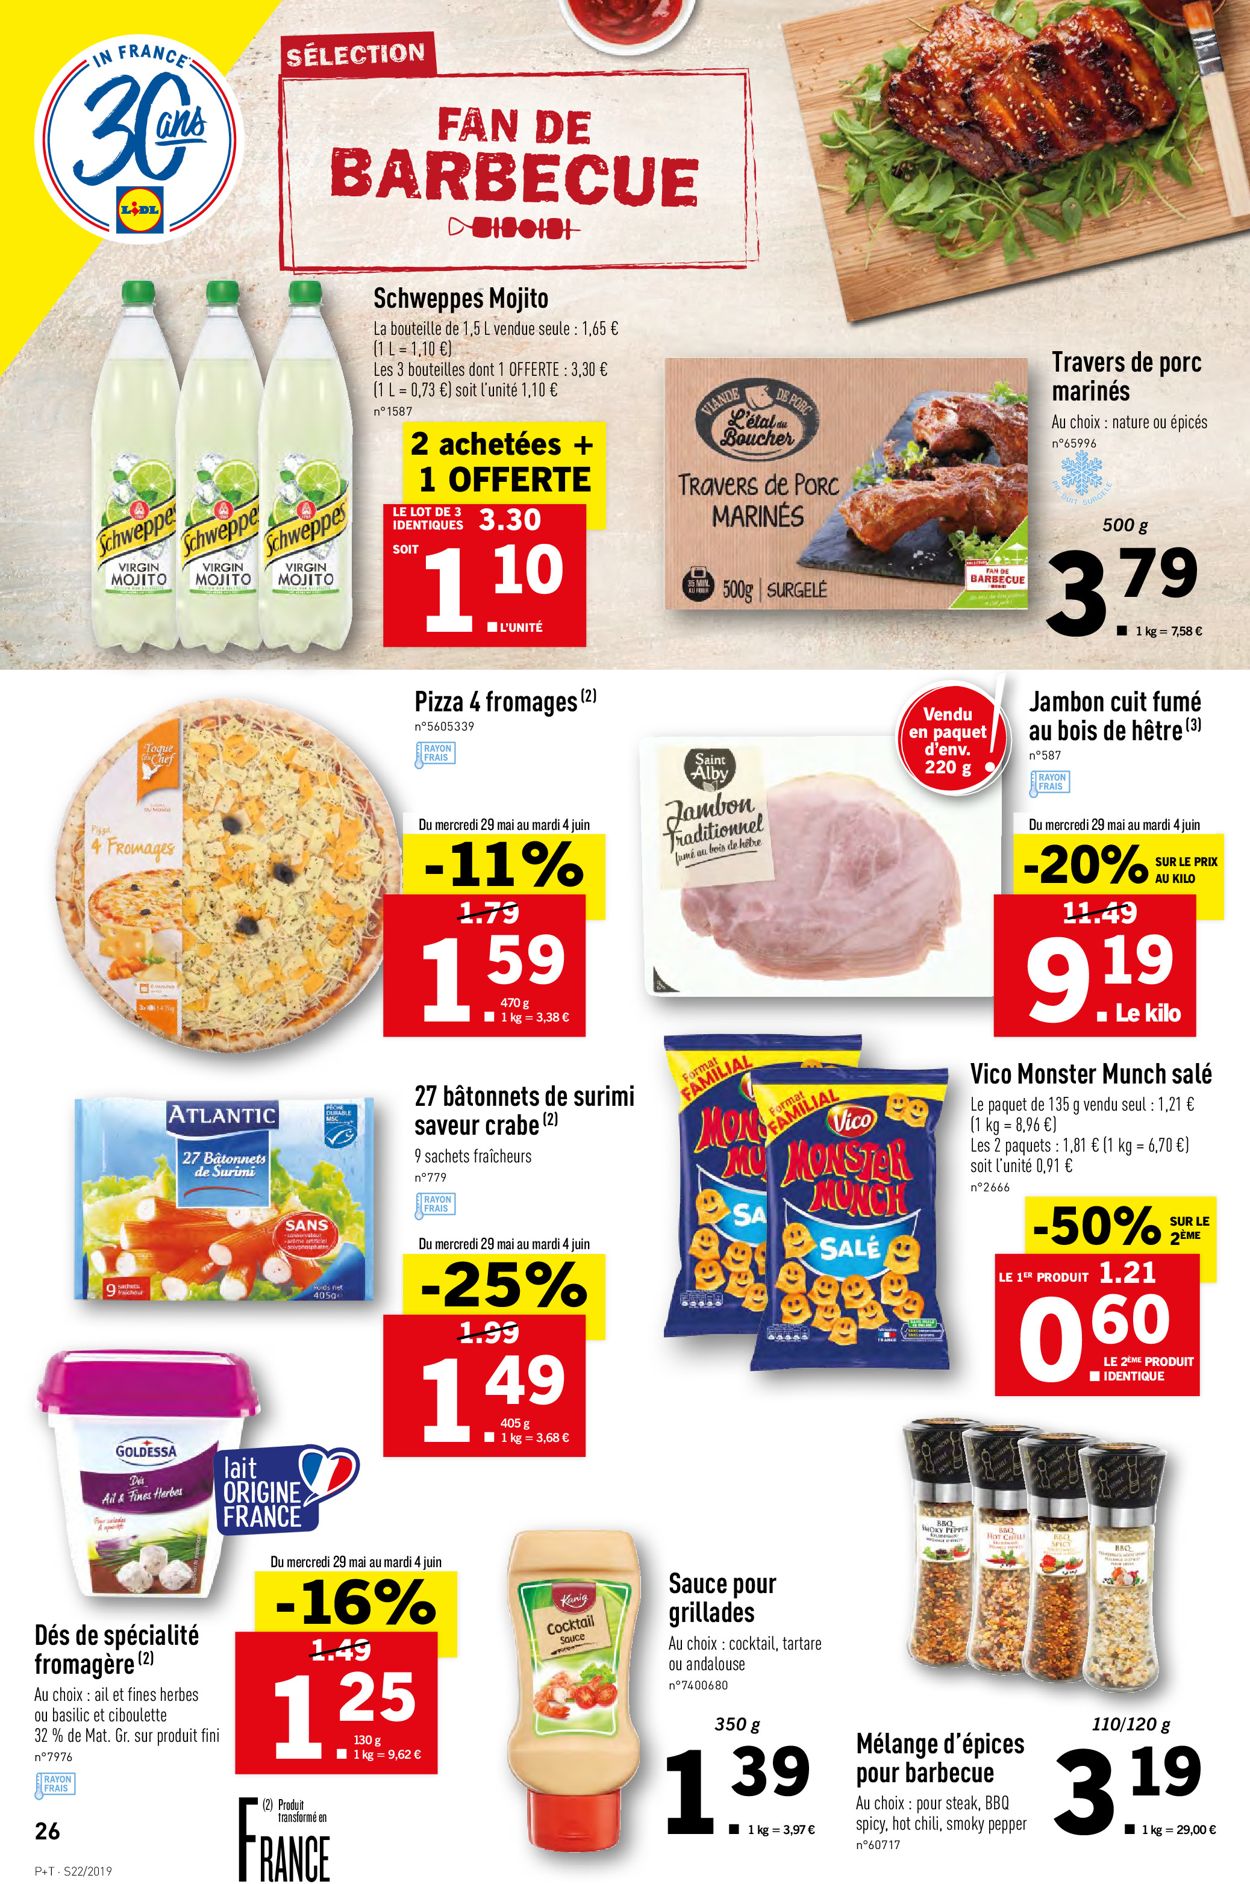 Lidl Catalogue - 29.05-04.06.2019 (Page 26)